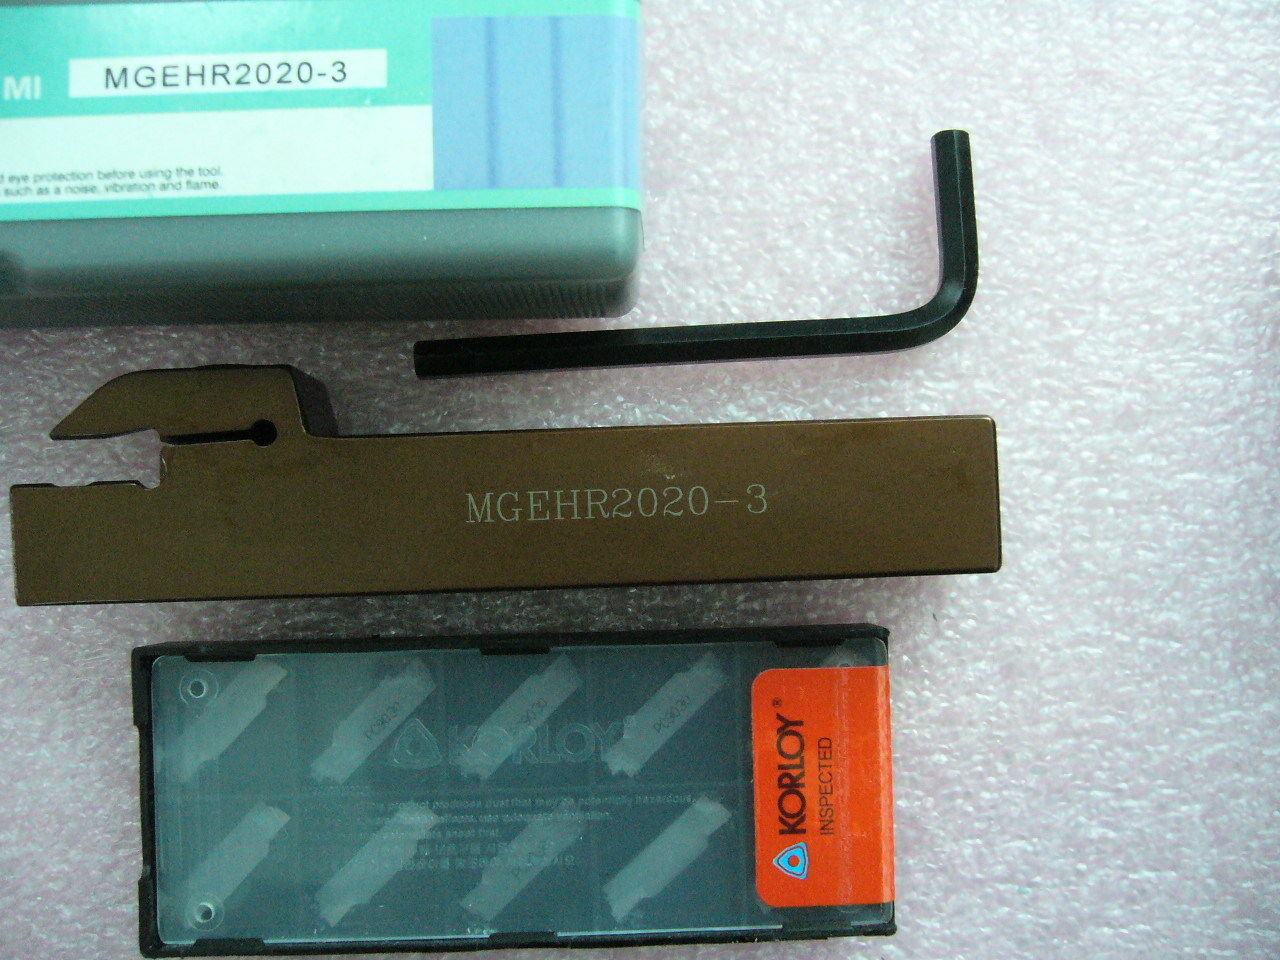 Grooving Parting 3mm Korloy inserts MGMN300-M PC9030 with Toolholder MGEHR2020-3 - Click Image to Close